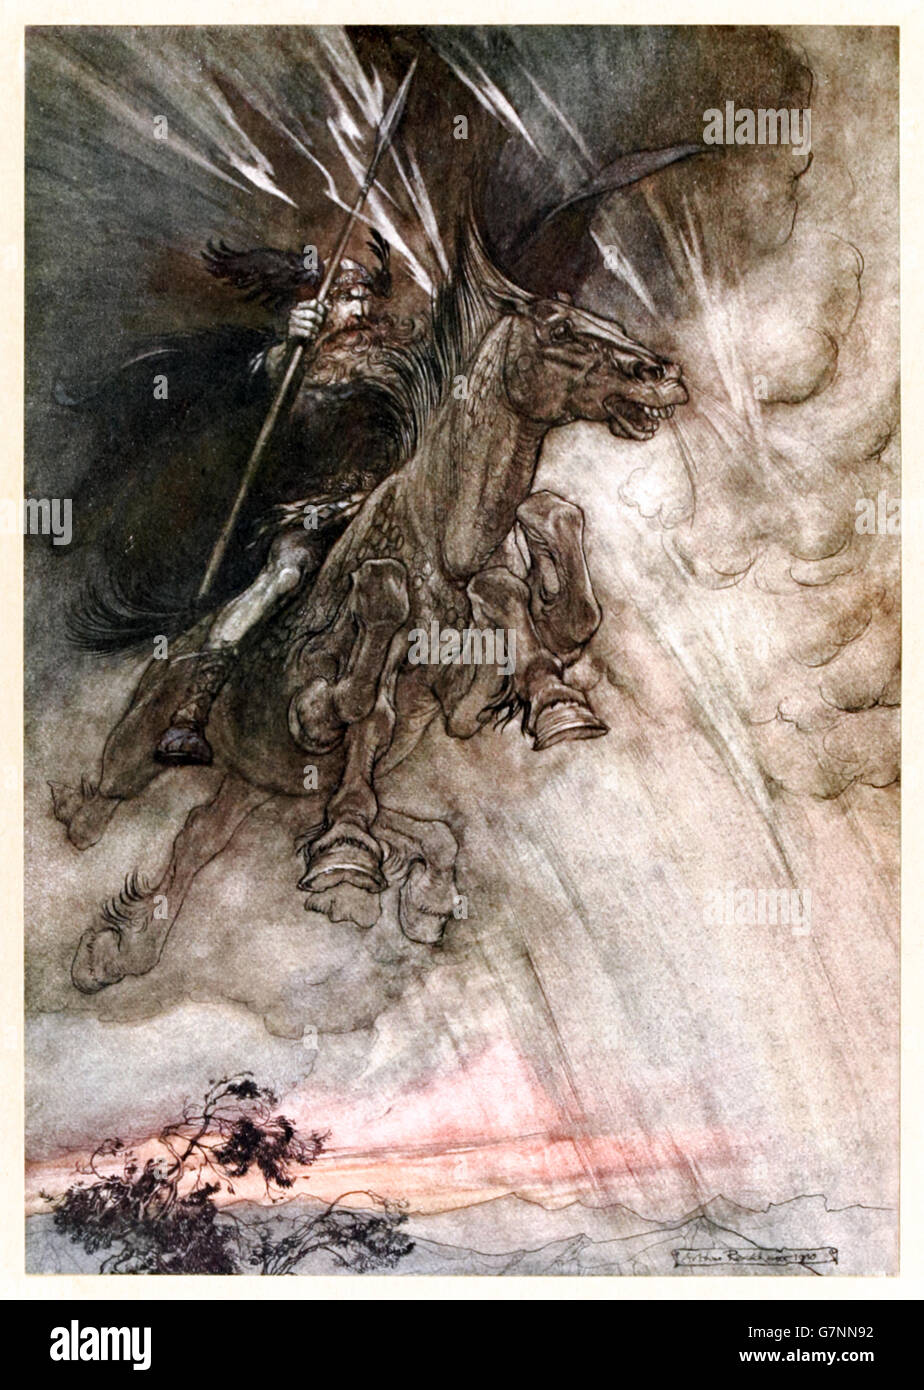 “Raging, Wotan Rides to the rock! Like a storm-wind he comes!” frontispiece from ‘The Rhinegold & the Valkyrie’ illustrated by Arthur Rackham (1867-1939), published in 1910. Wotan arrives in wrath to pass judgment on his daughter Brunnhilde who disobeying him by granting victory to Siegmund and not Hunding as instructed. Stock Photo